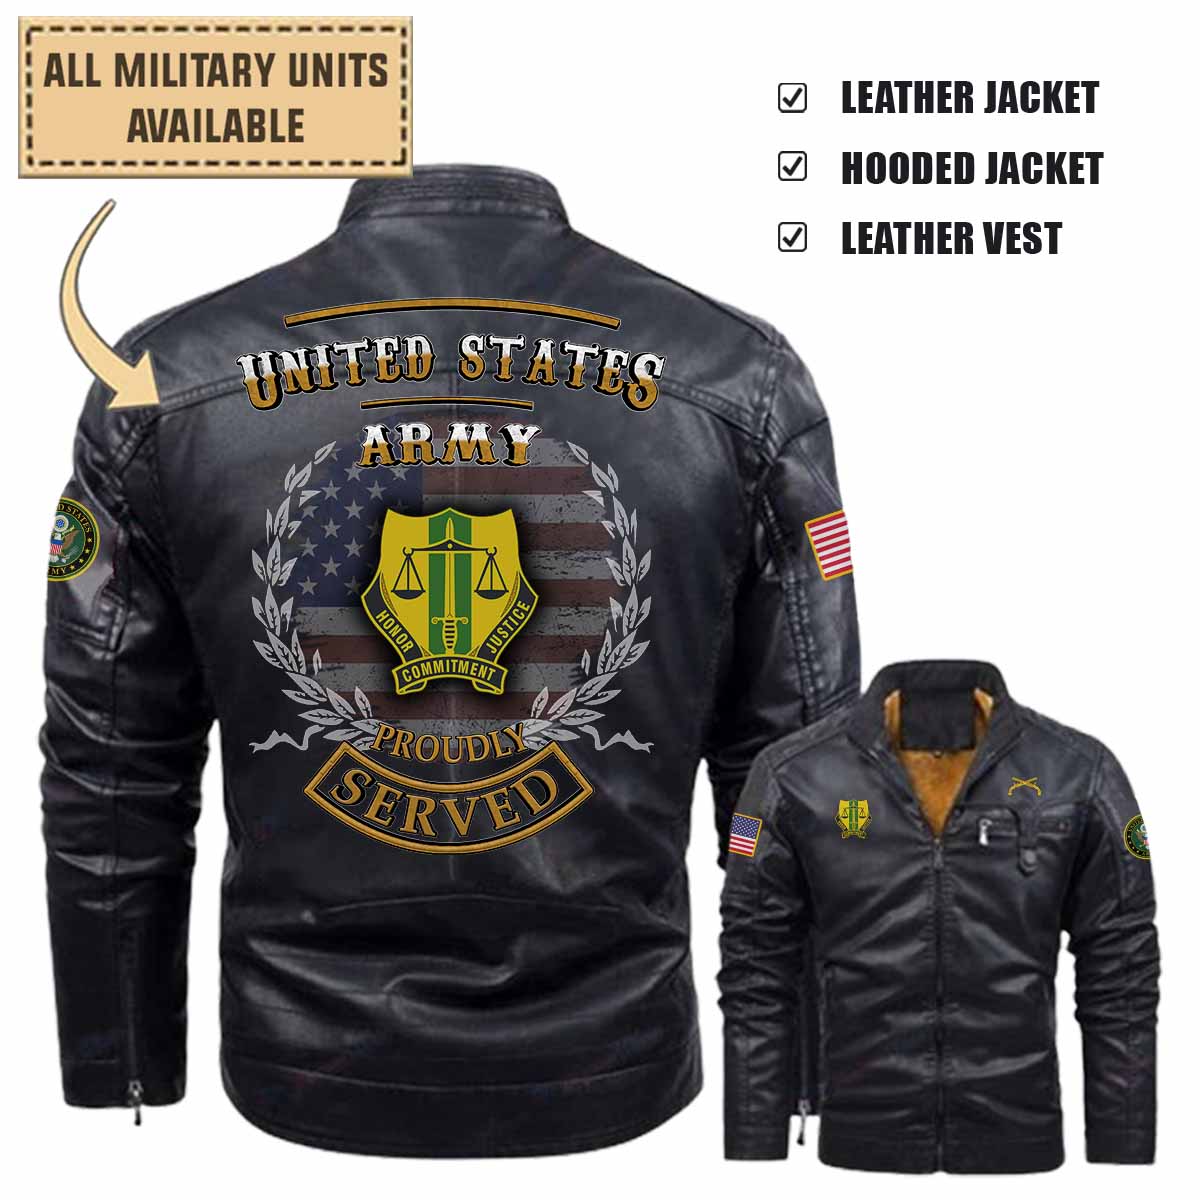 724th MP BN 724th Military Police Battalion_Military Leather Jacket and Vest